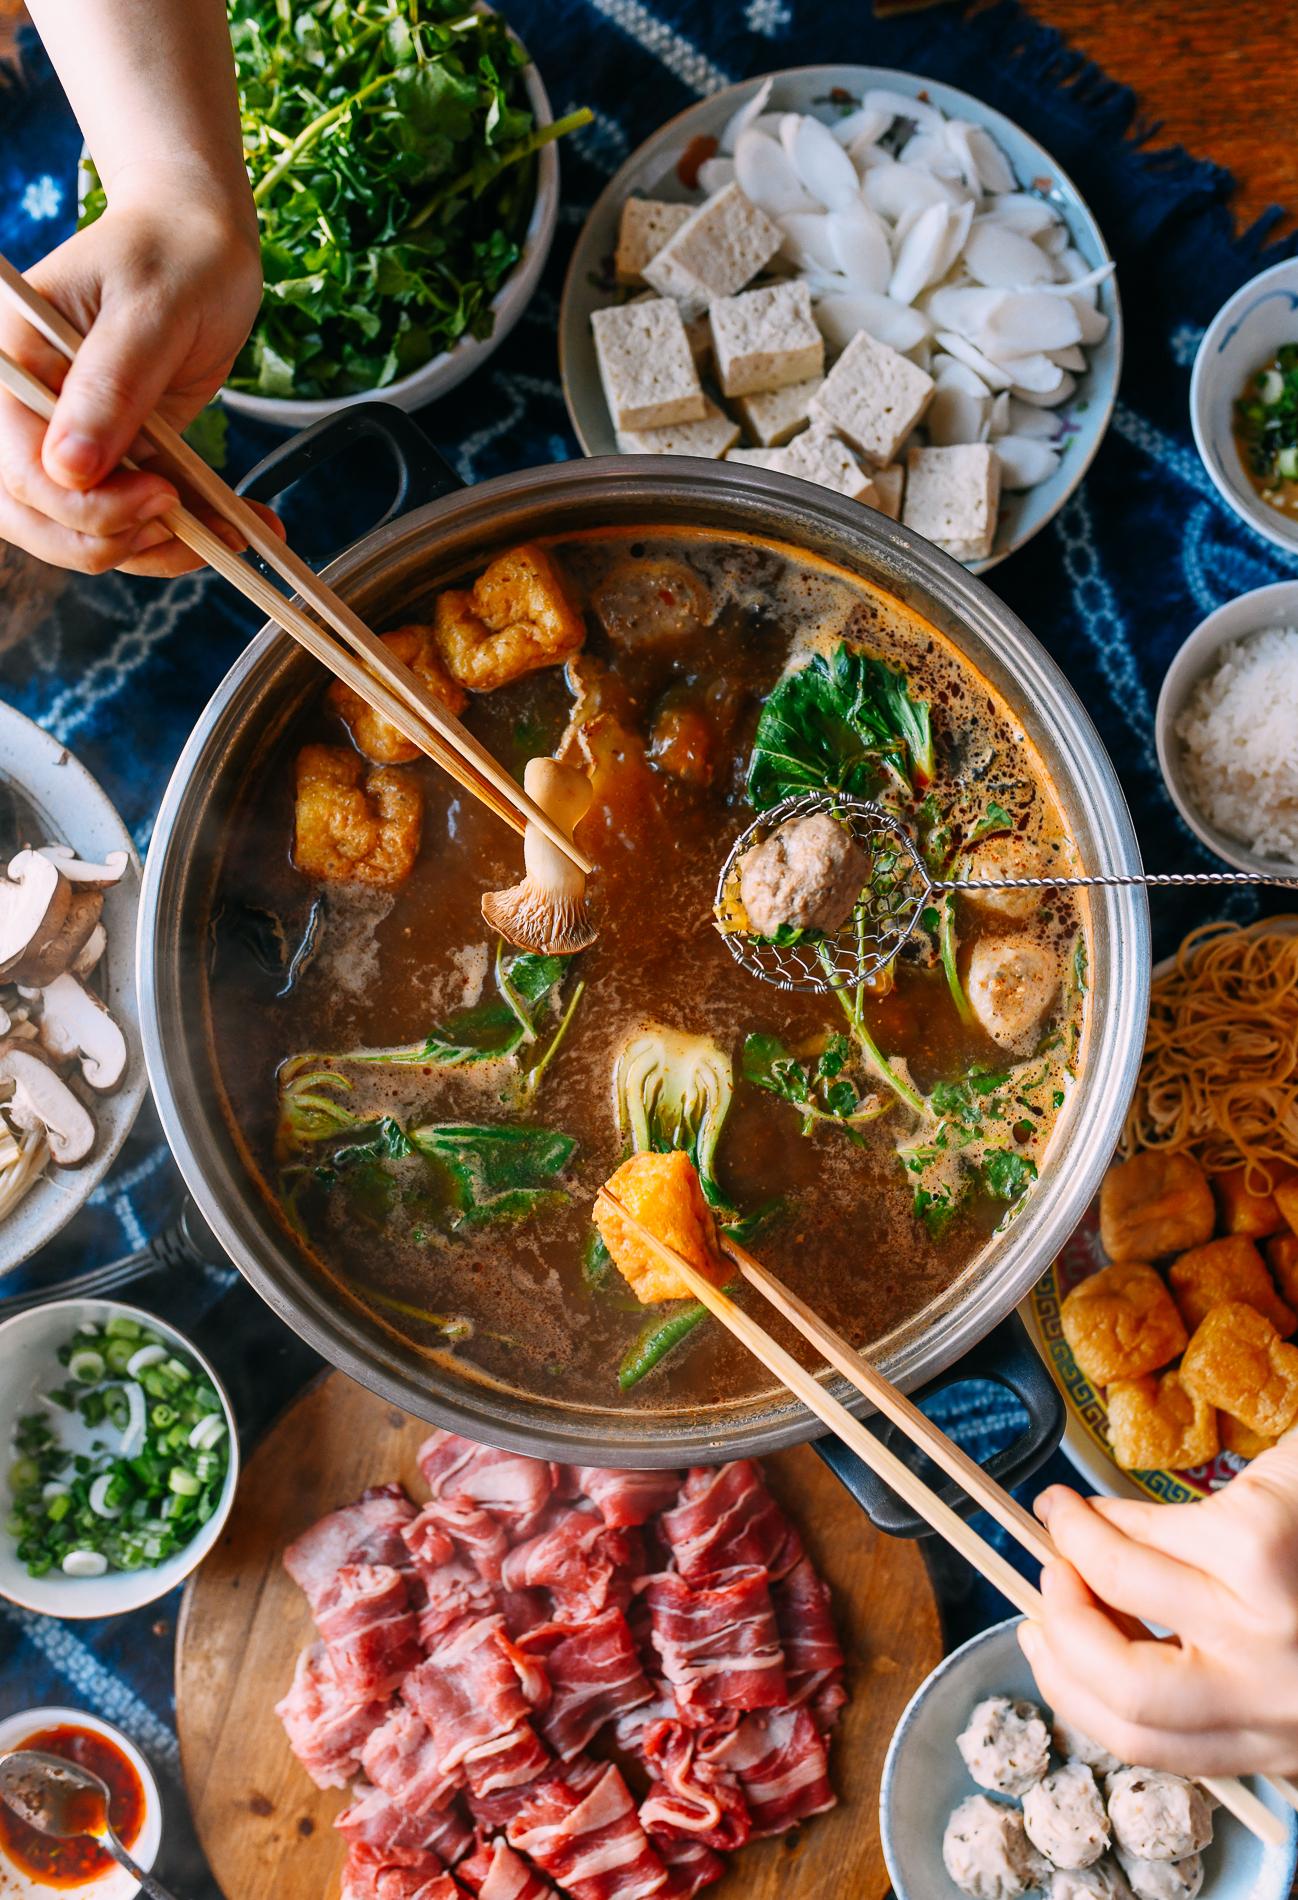  Dive into an explosion of flavor with our Chinese Hot Pot.